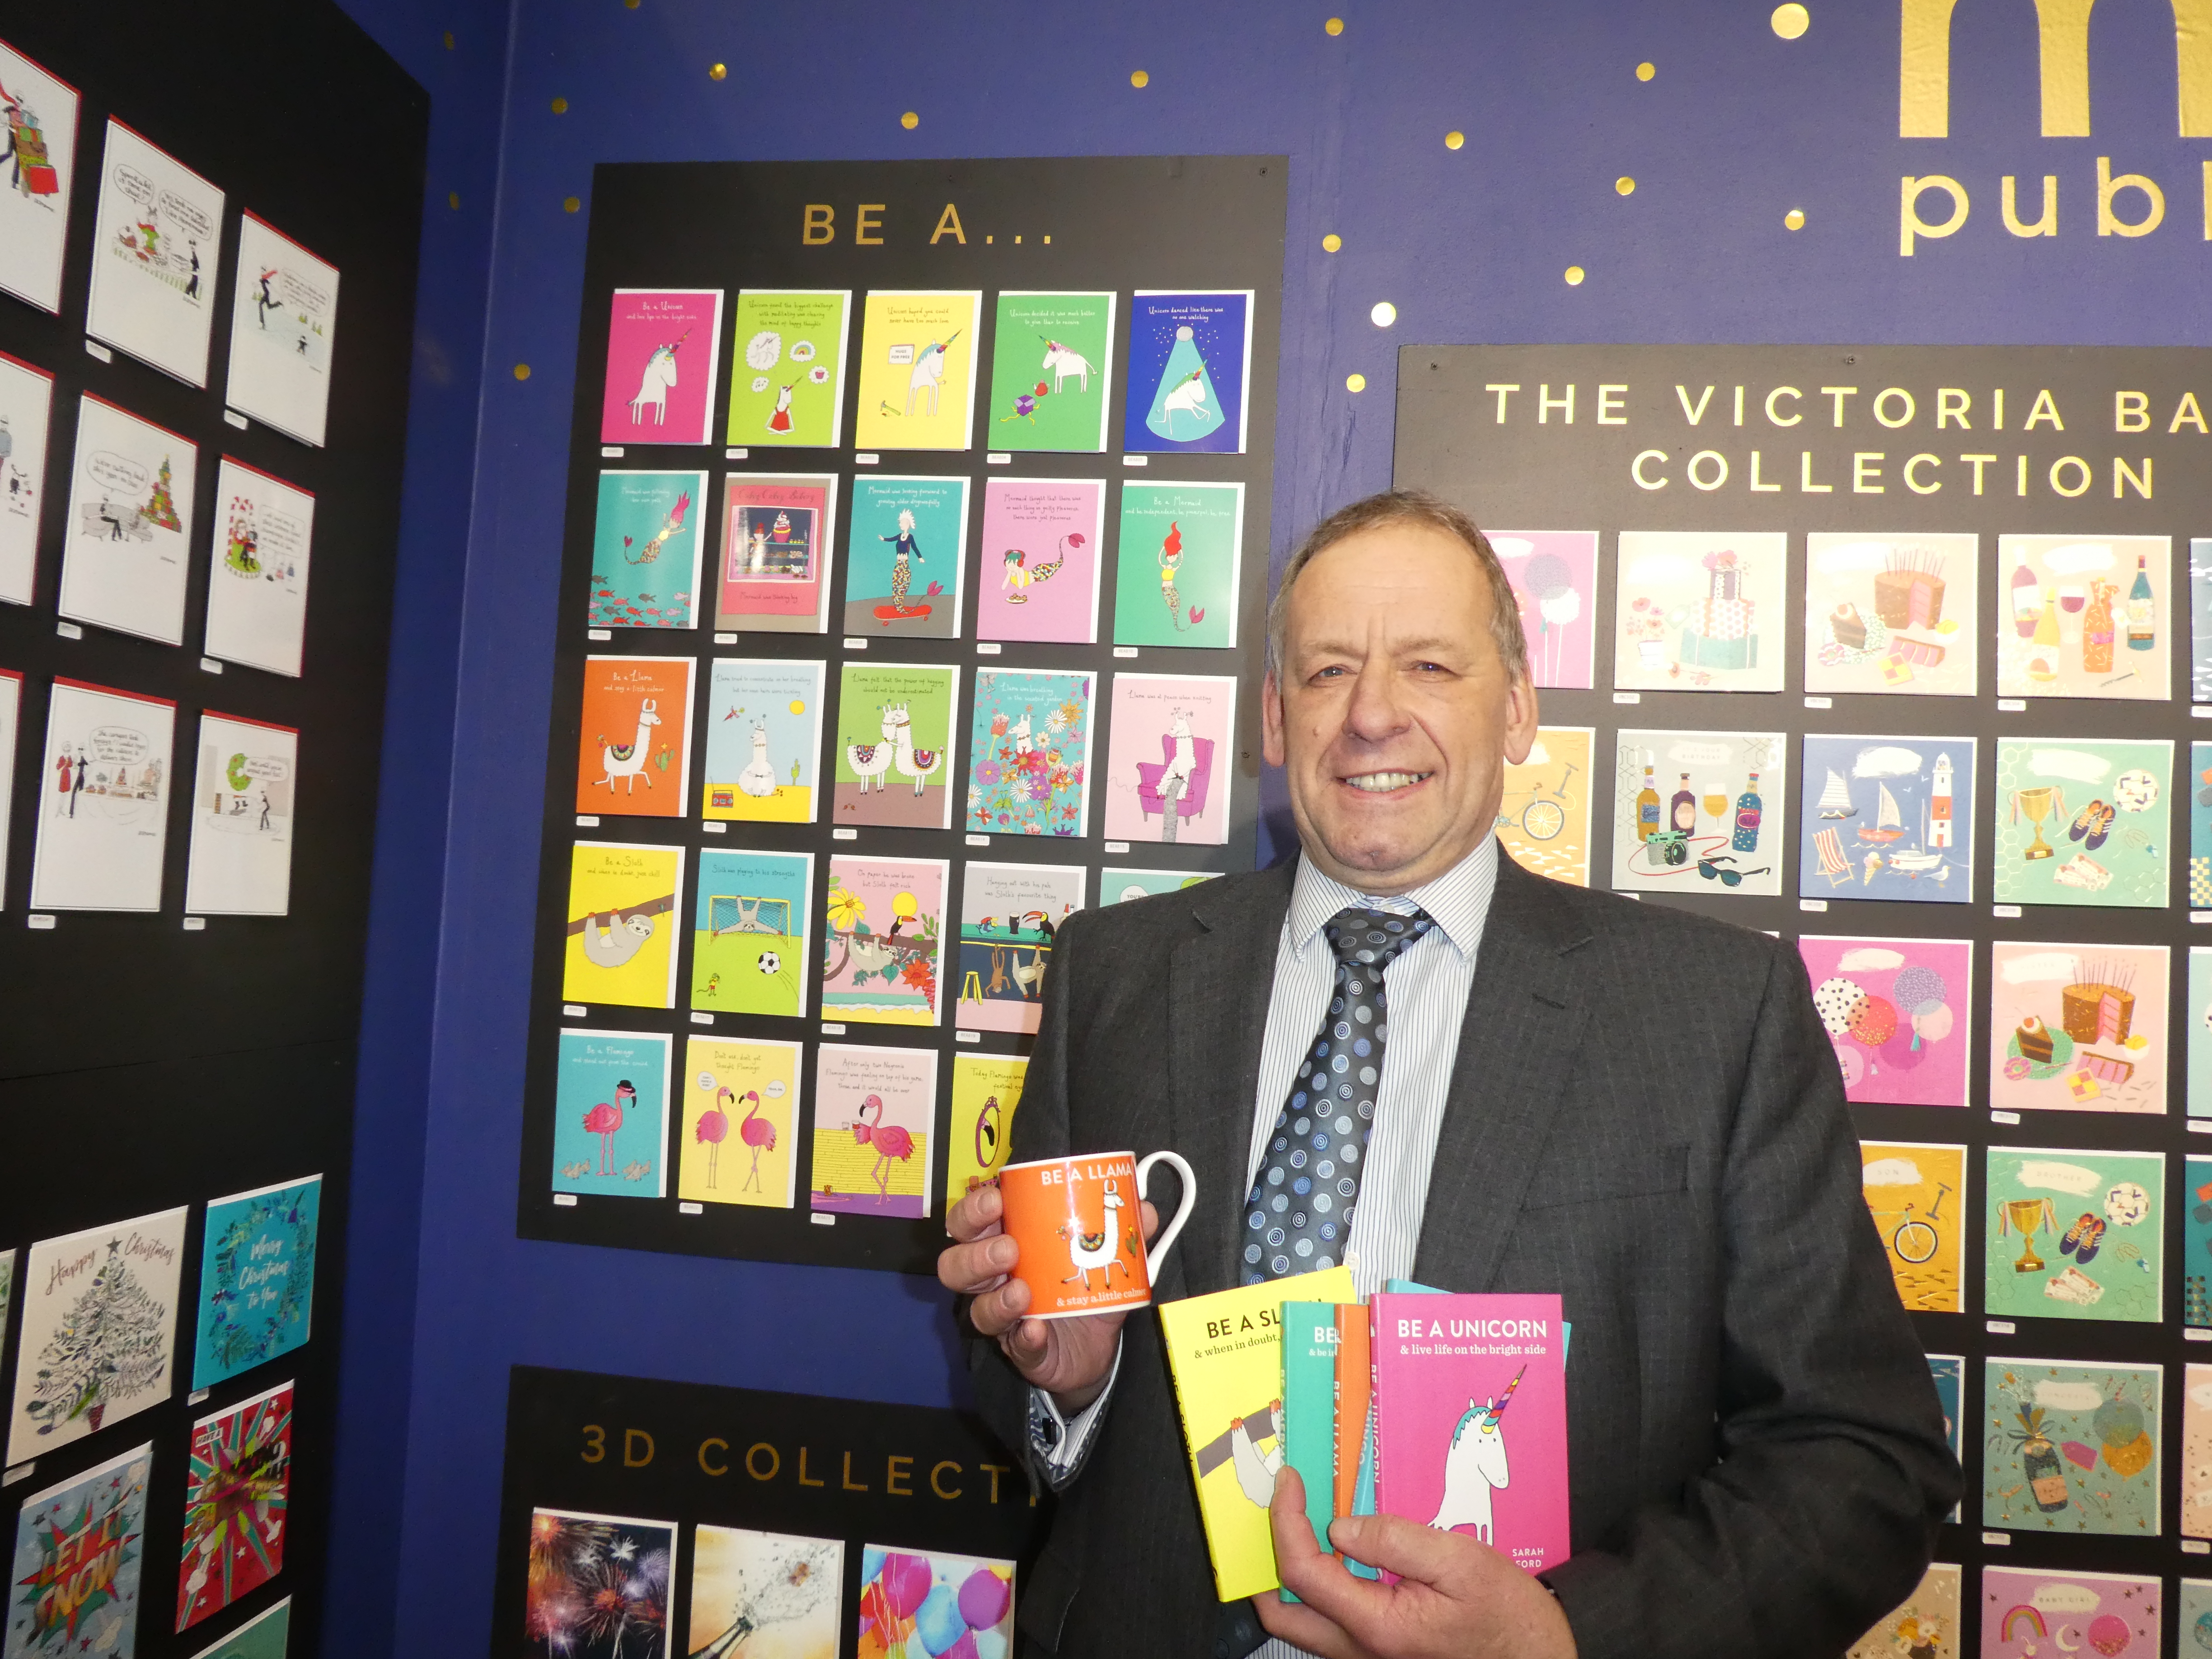 Above: While the Tate collection and a range of bamboo travel mugs were a major attractions on its Museums & Galleries stand, sibling brand Mint also had some new licensed ranges. Company’s co-owner Alan Williams showed off its new ‘Be a…’ range, based on Sarah Forde’s popular books, published by Octopus with mugs being produced under licence by McLaggan Mugs.  